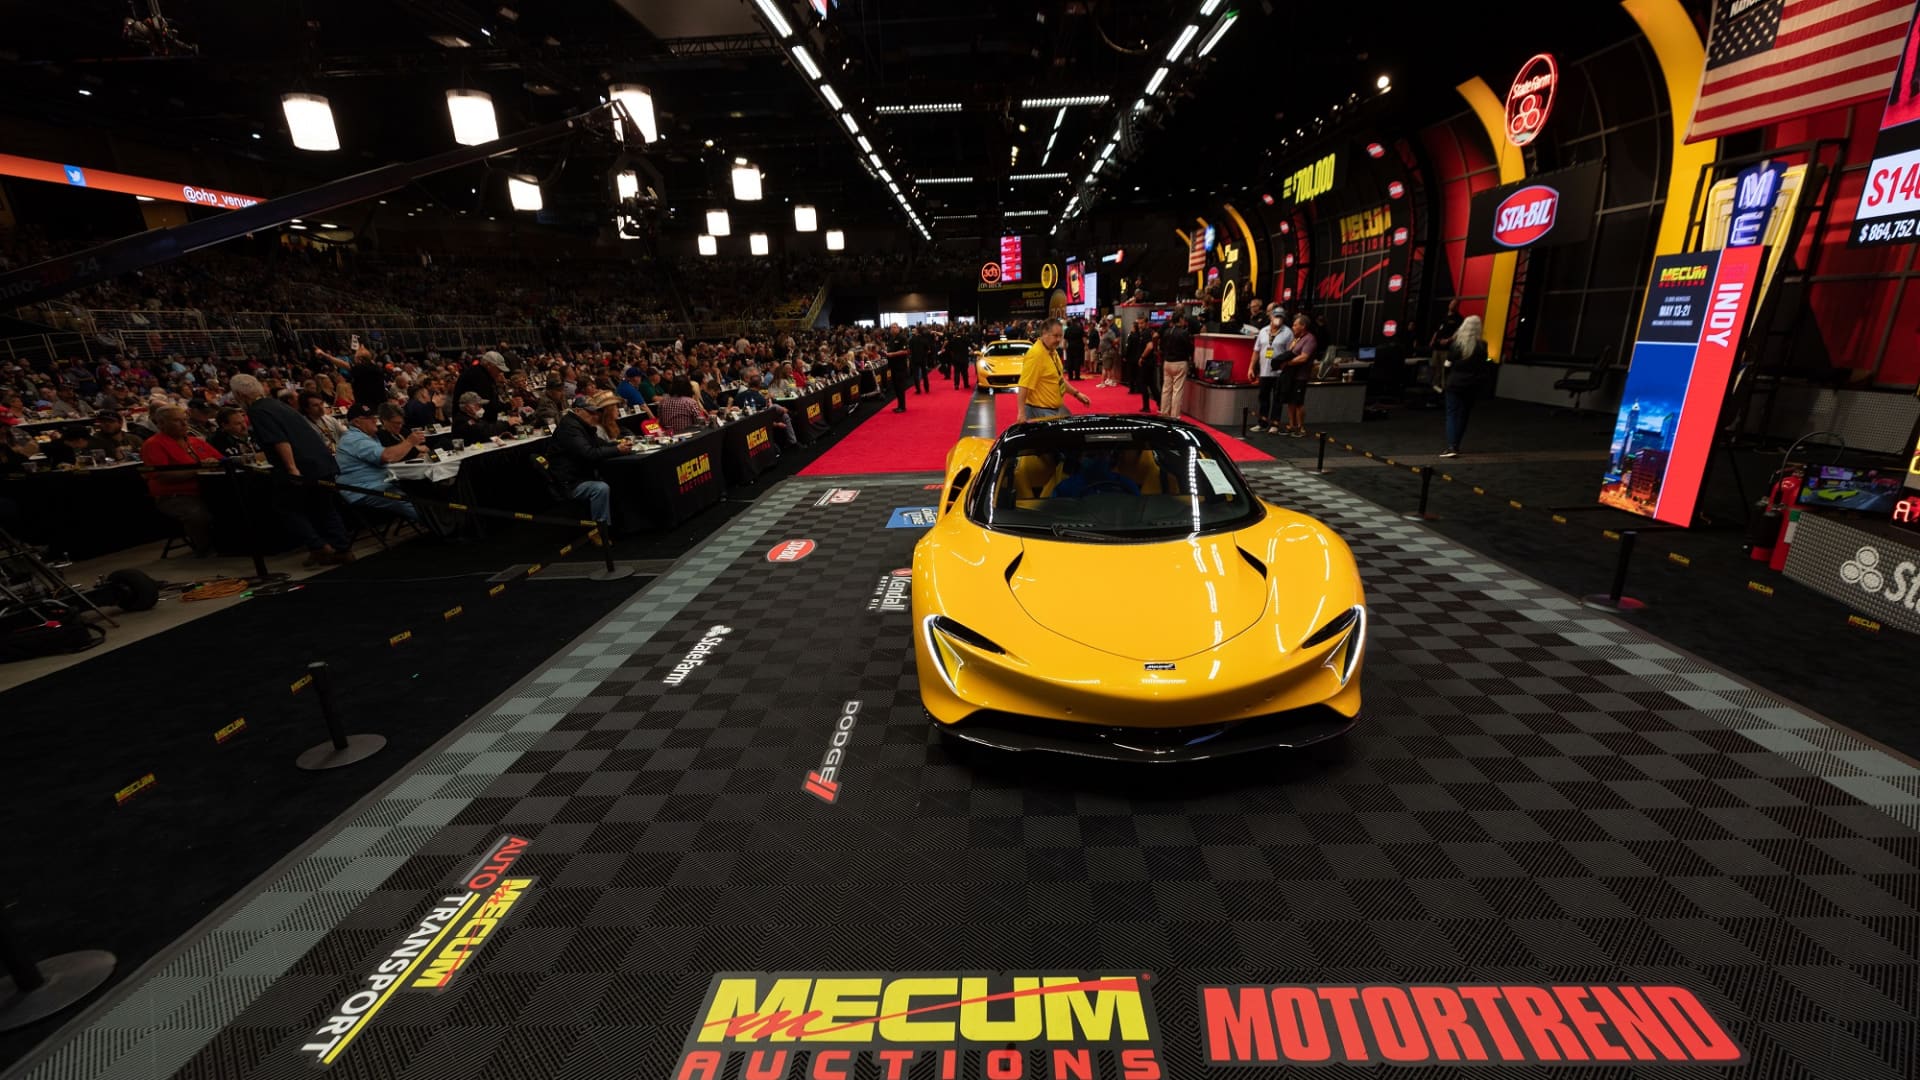 Collector cars are on display at a Mecum Auctions live event in Kissimmee, Florida in January 2022.